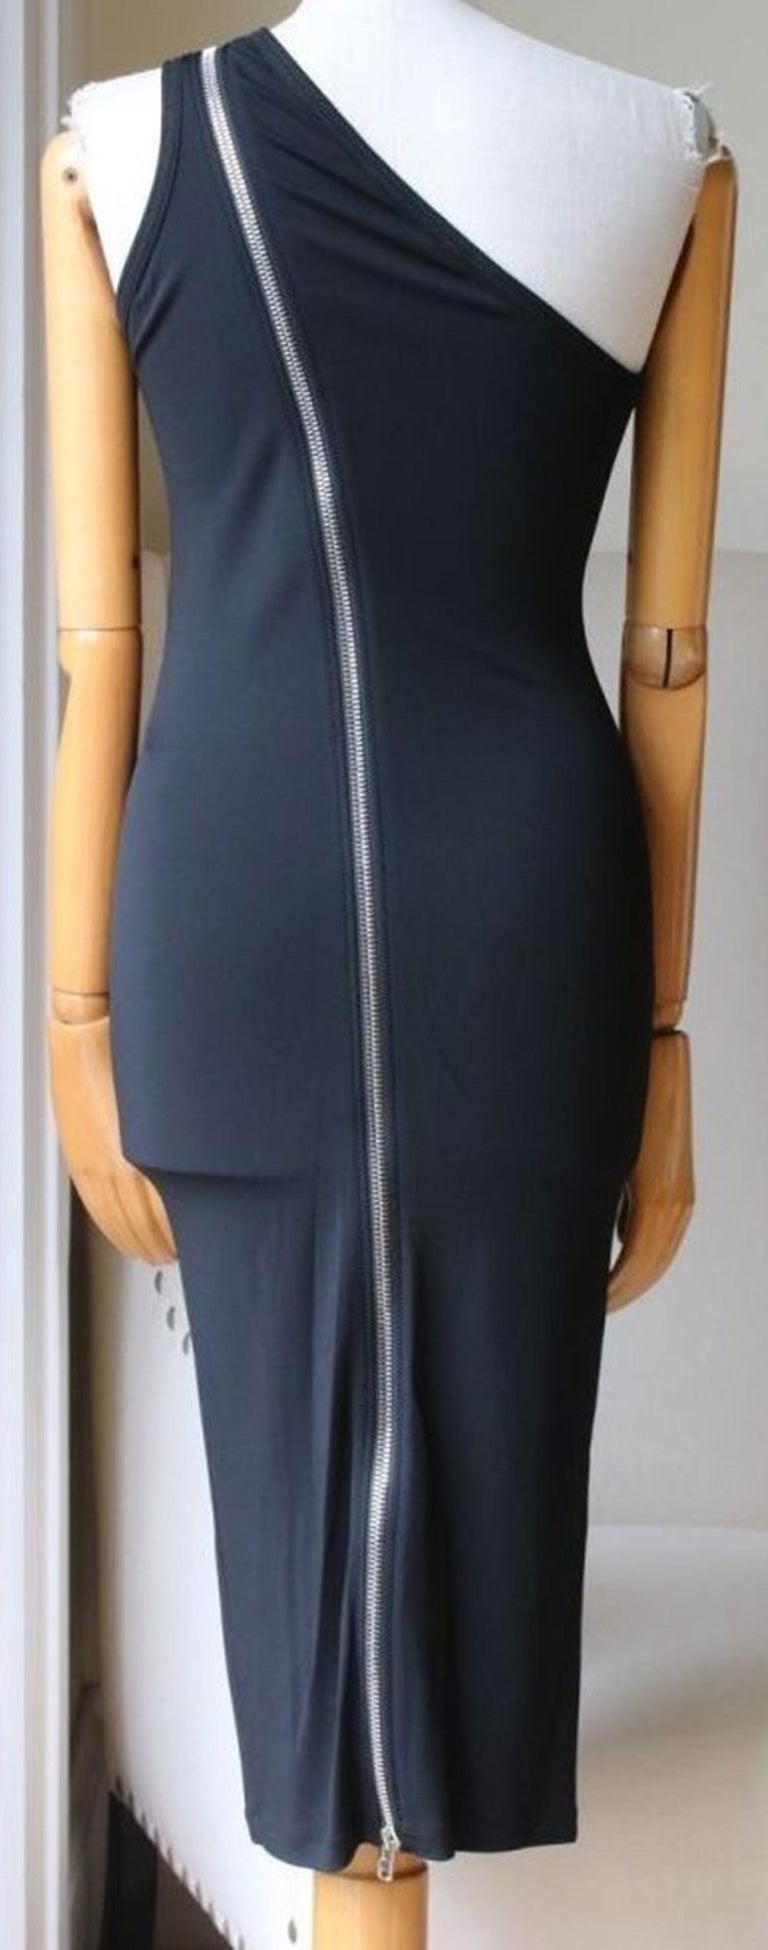 Givenchy One-Shoulder Zip-Detailed Stretch-Jersey Dress In Excellent Condition For Sale In London, GB